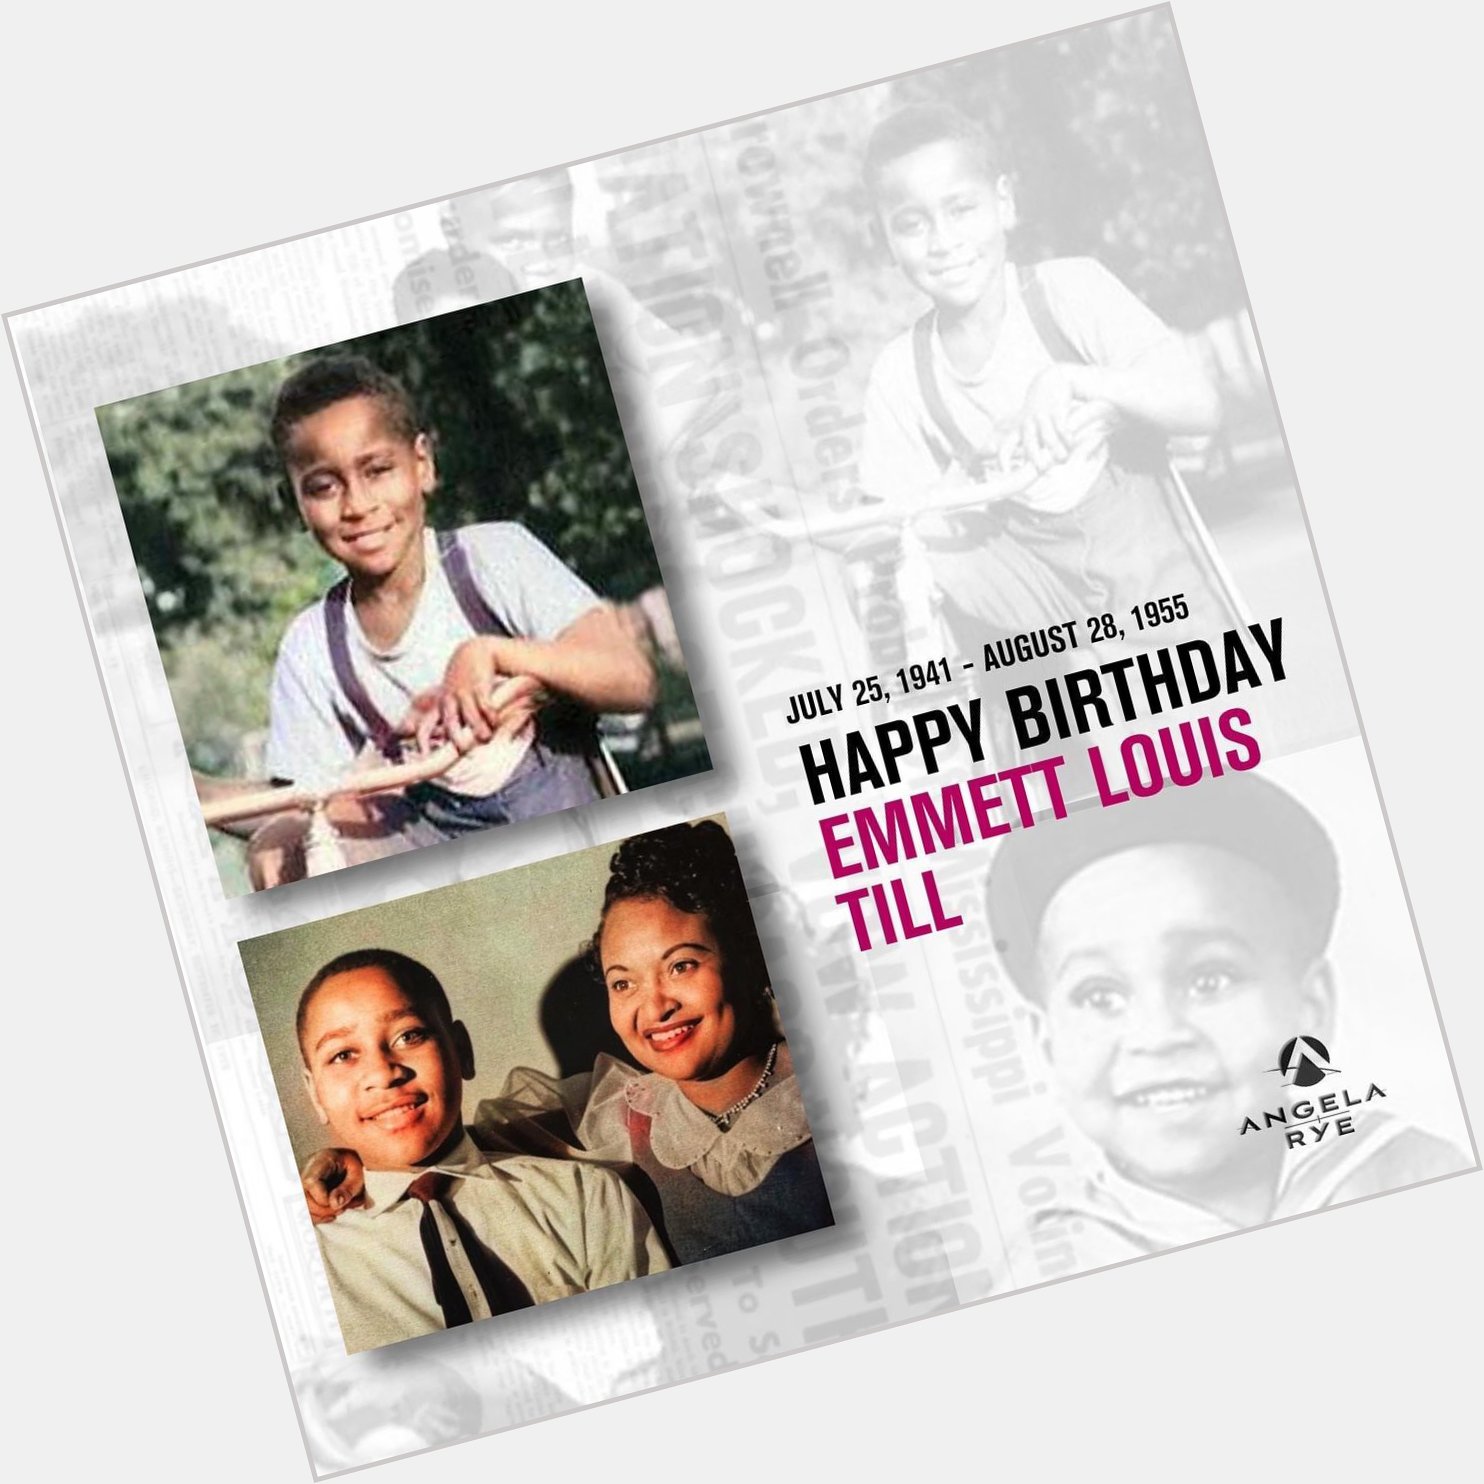 Happy Birthday Emmett Till! We continue to fight for racial justice in your honor! 